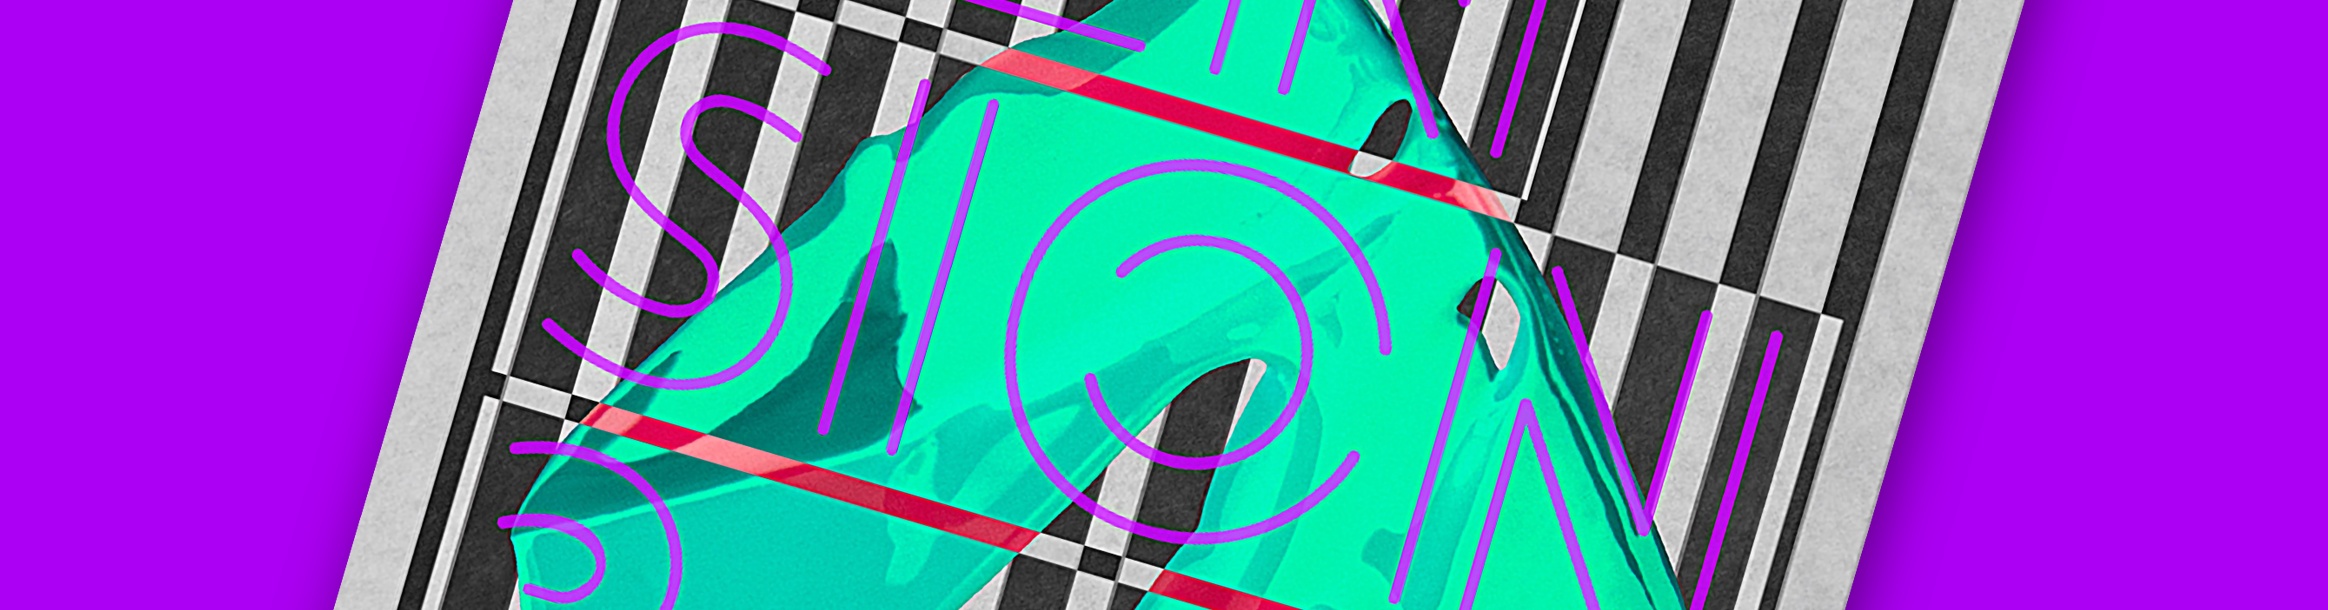 Tension Posters project header image